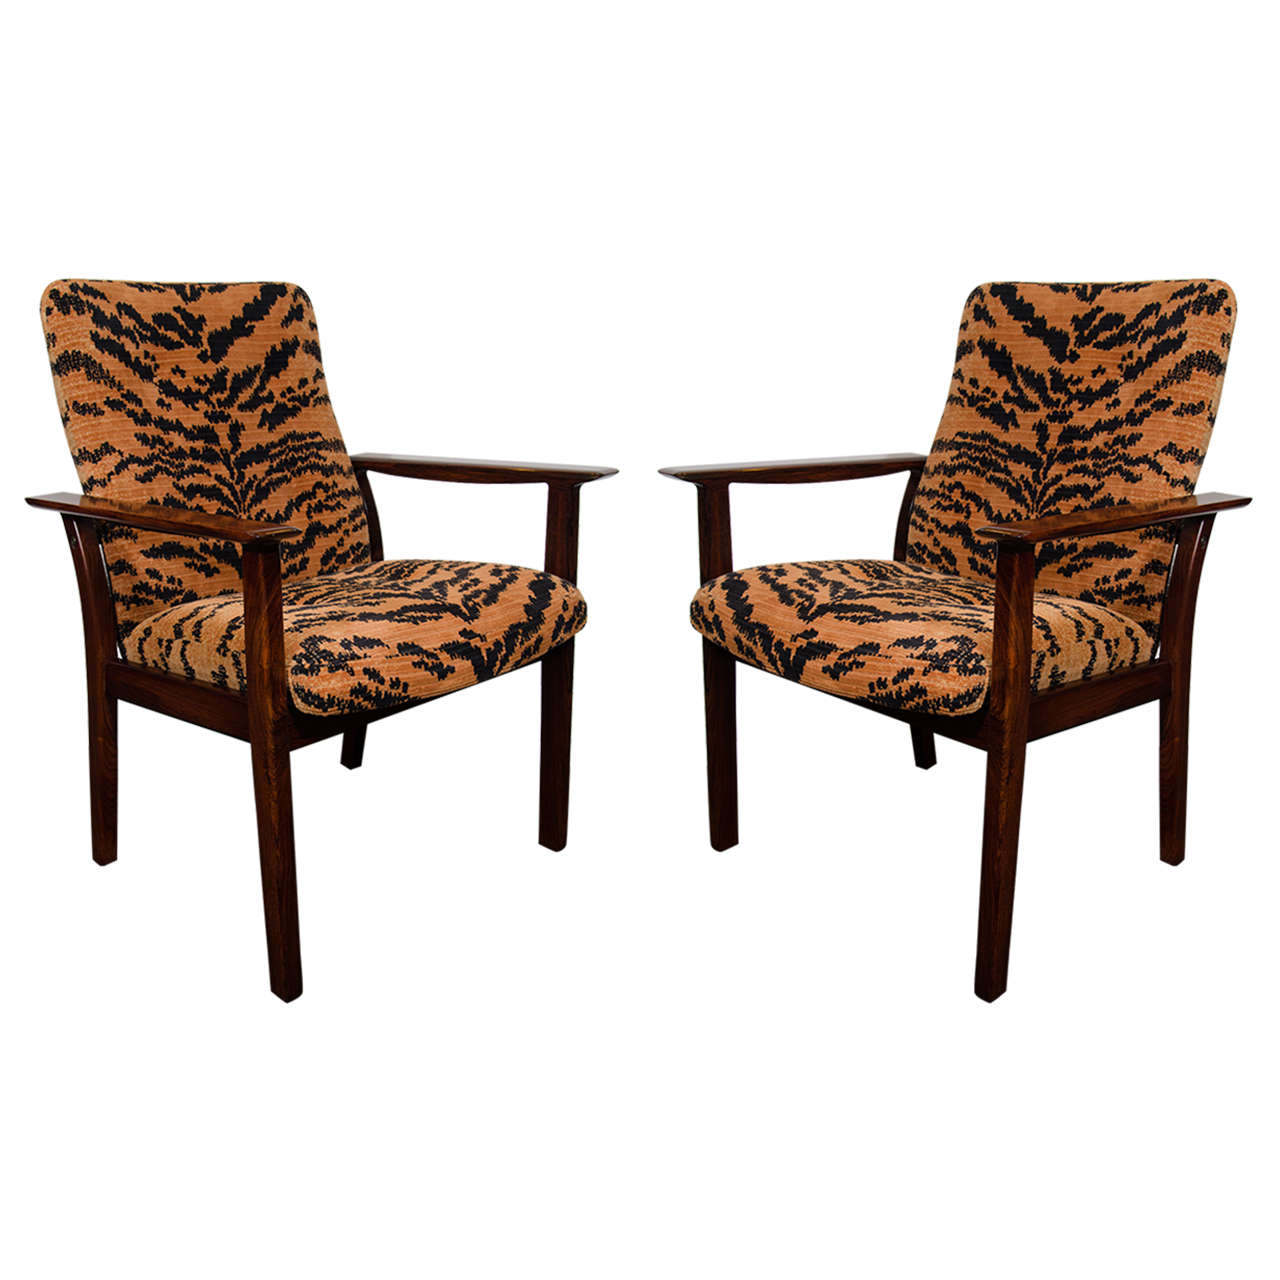 Midcentury Pair of Rosewood Chairs in Tiger Velvet Upholstery